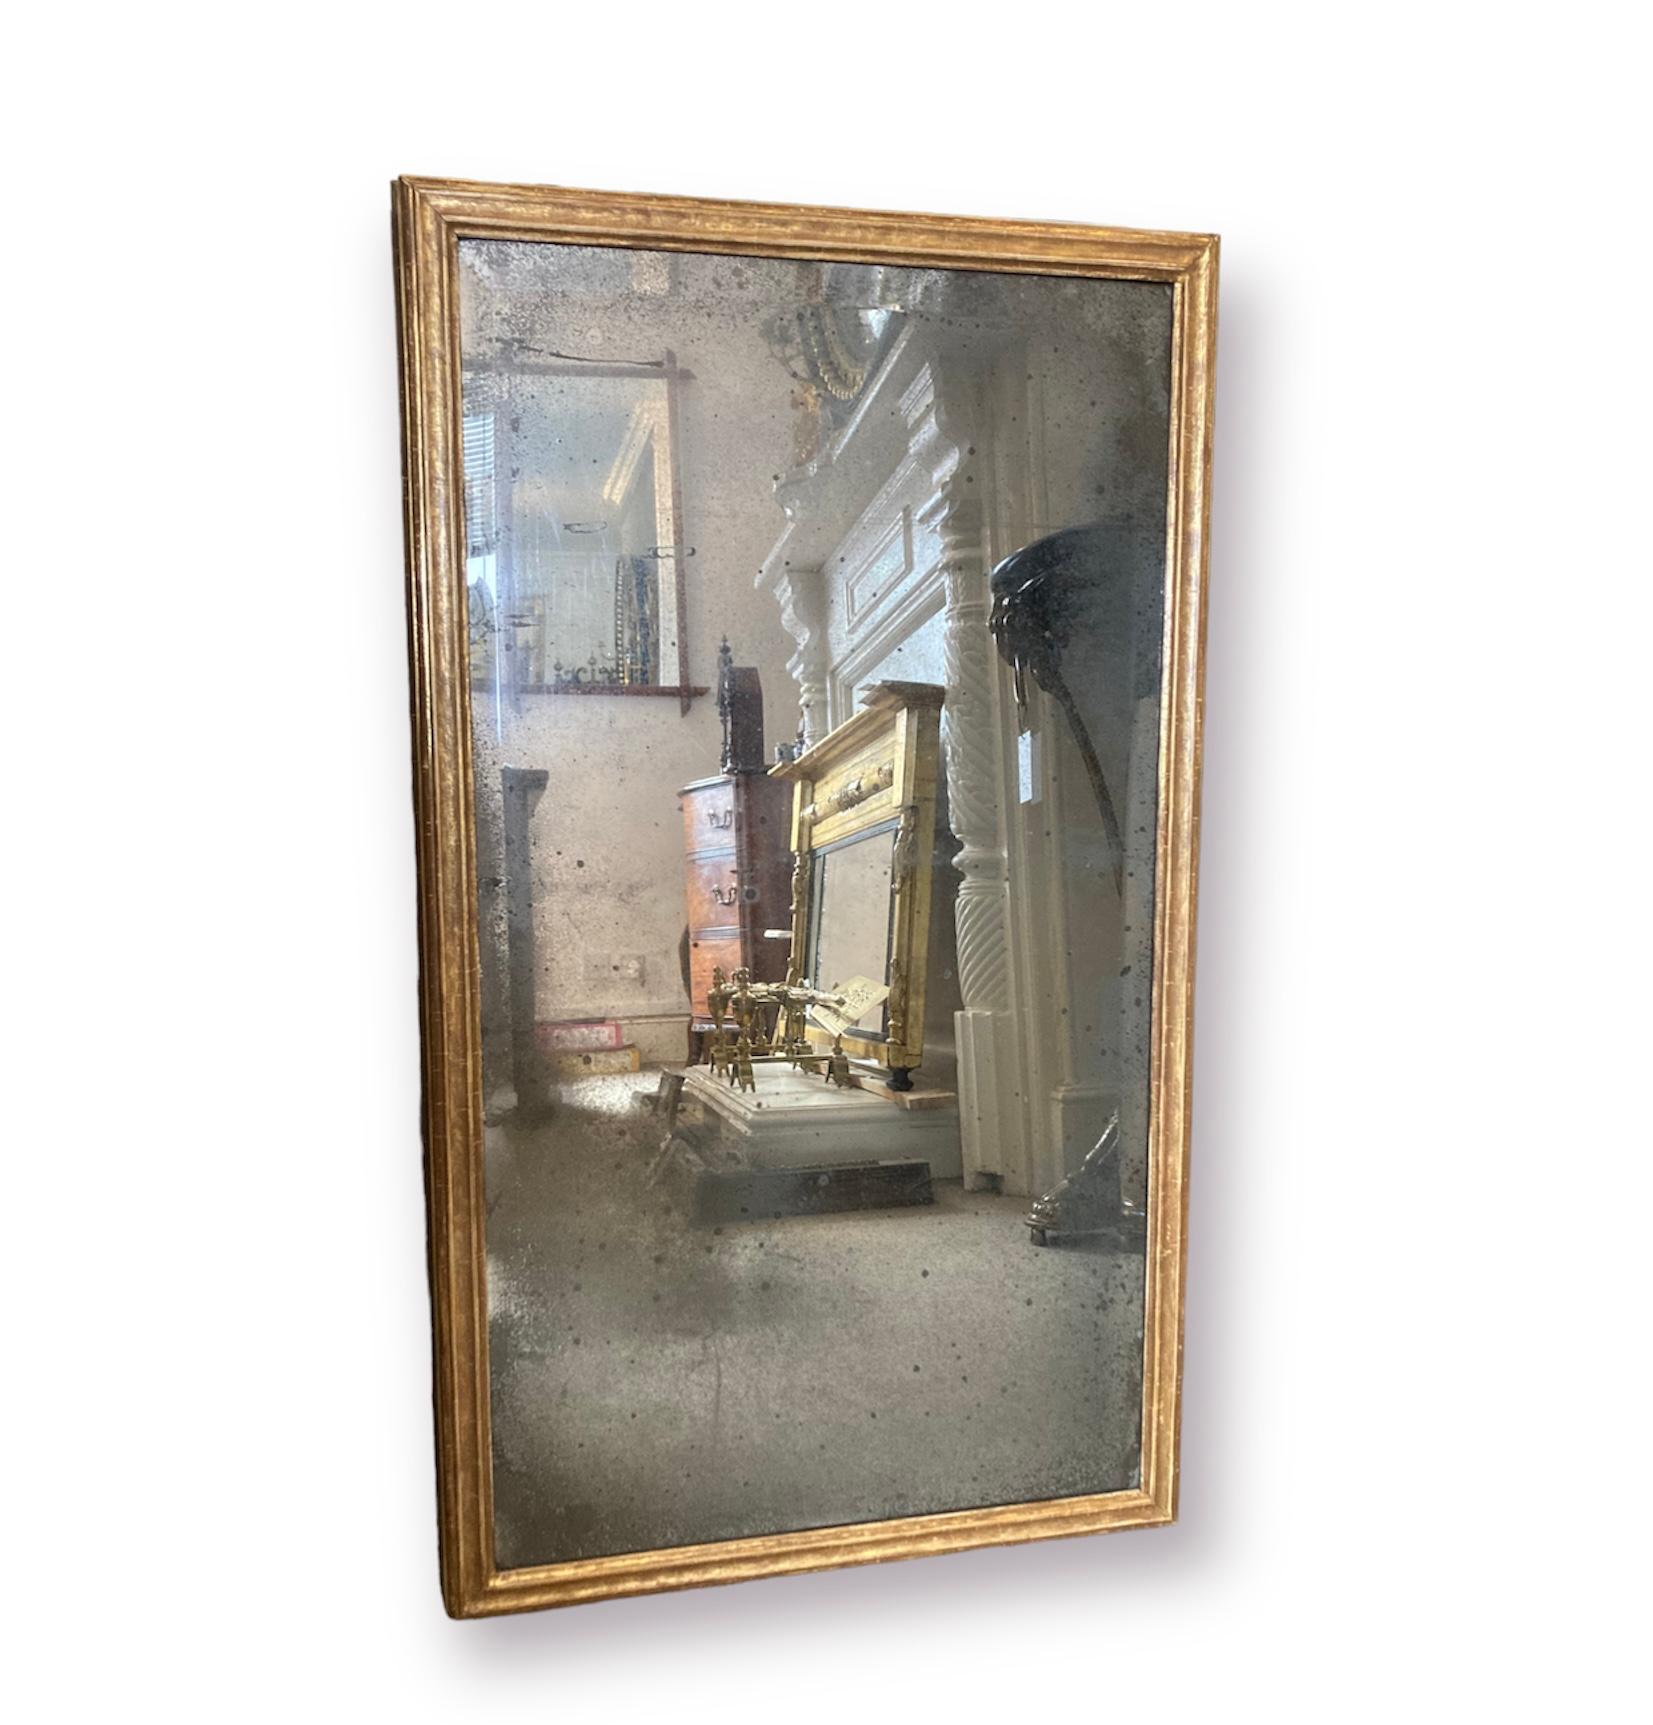 19th Century Rectangular Bevelled Giltwood Mirror with 19th C Mercury mirror plate For Sale